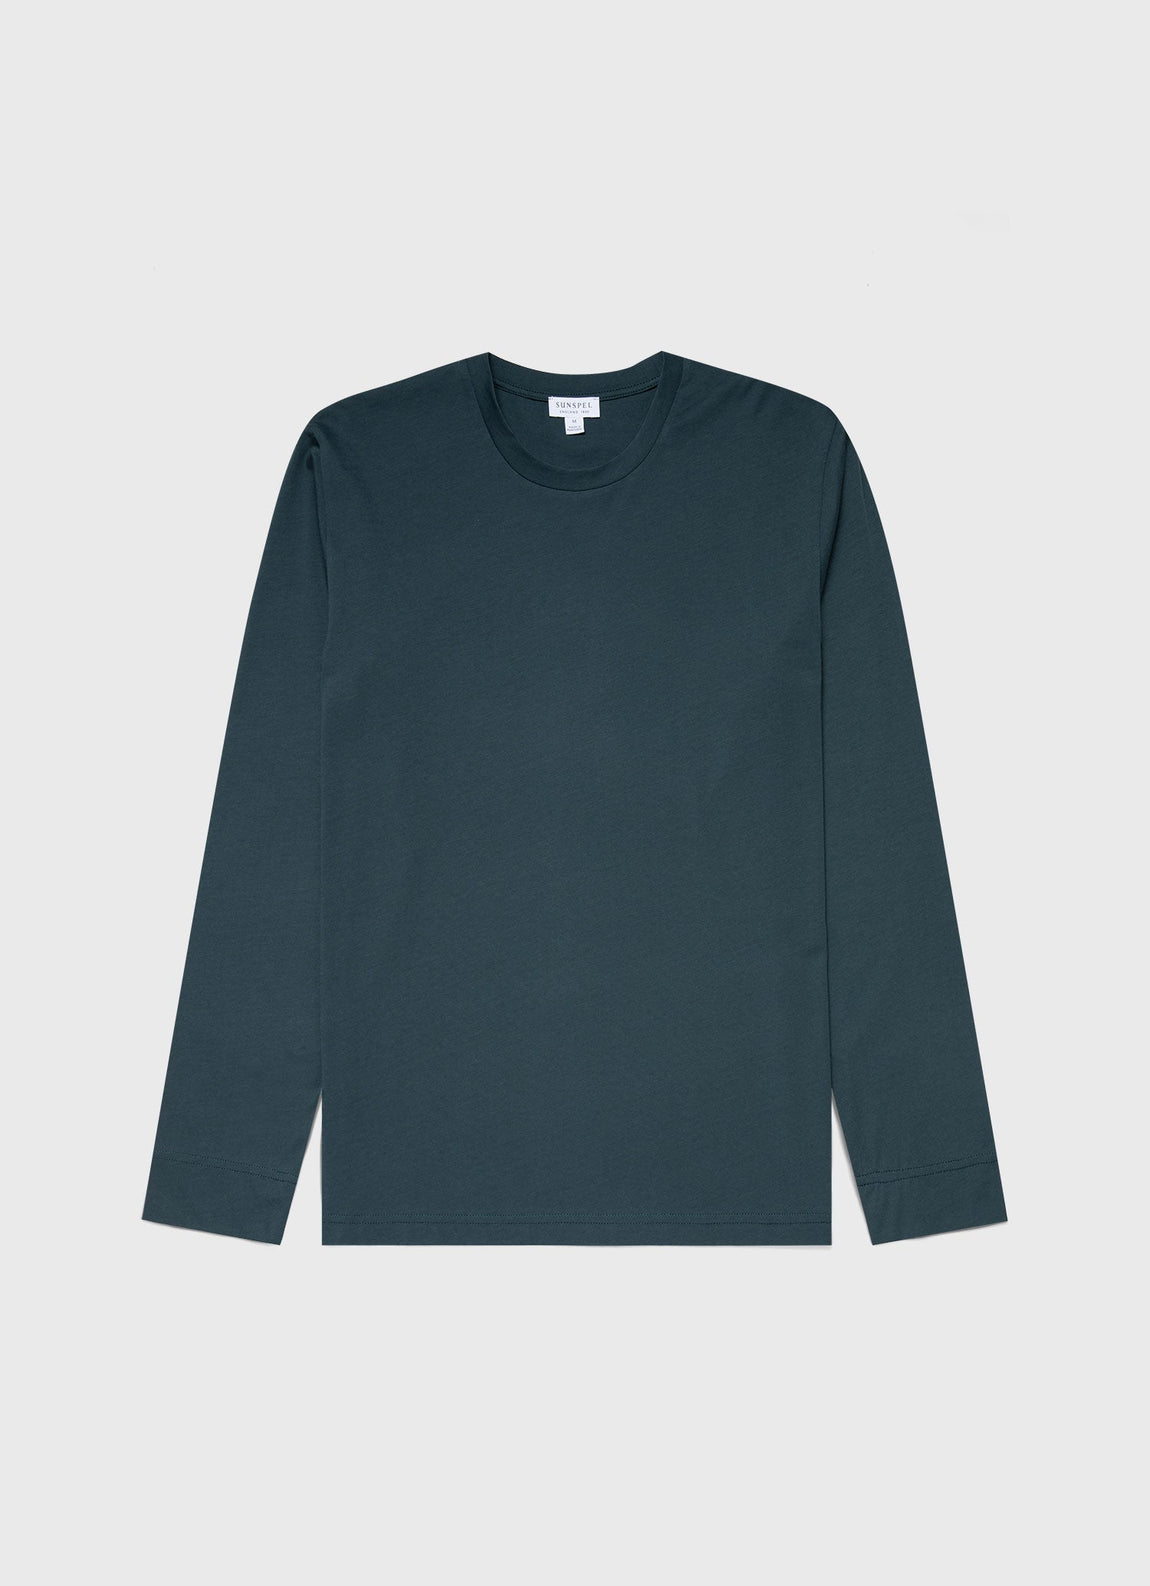 Men's Long Sleeve Riviera Midweight T-shirt in Peacock